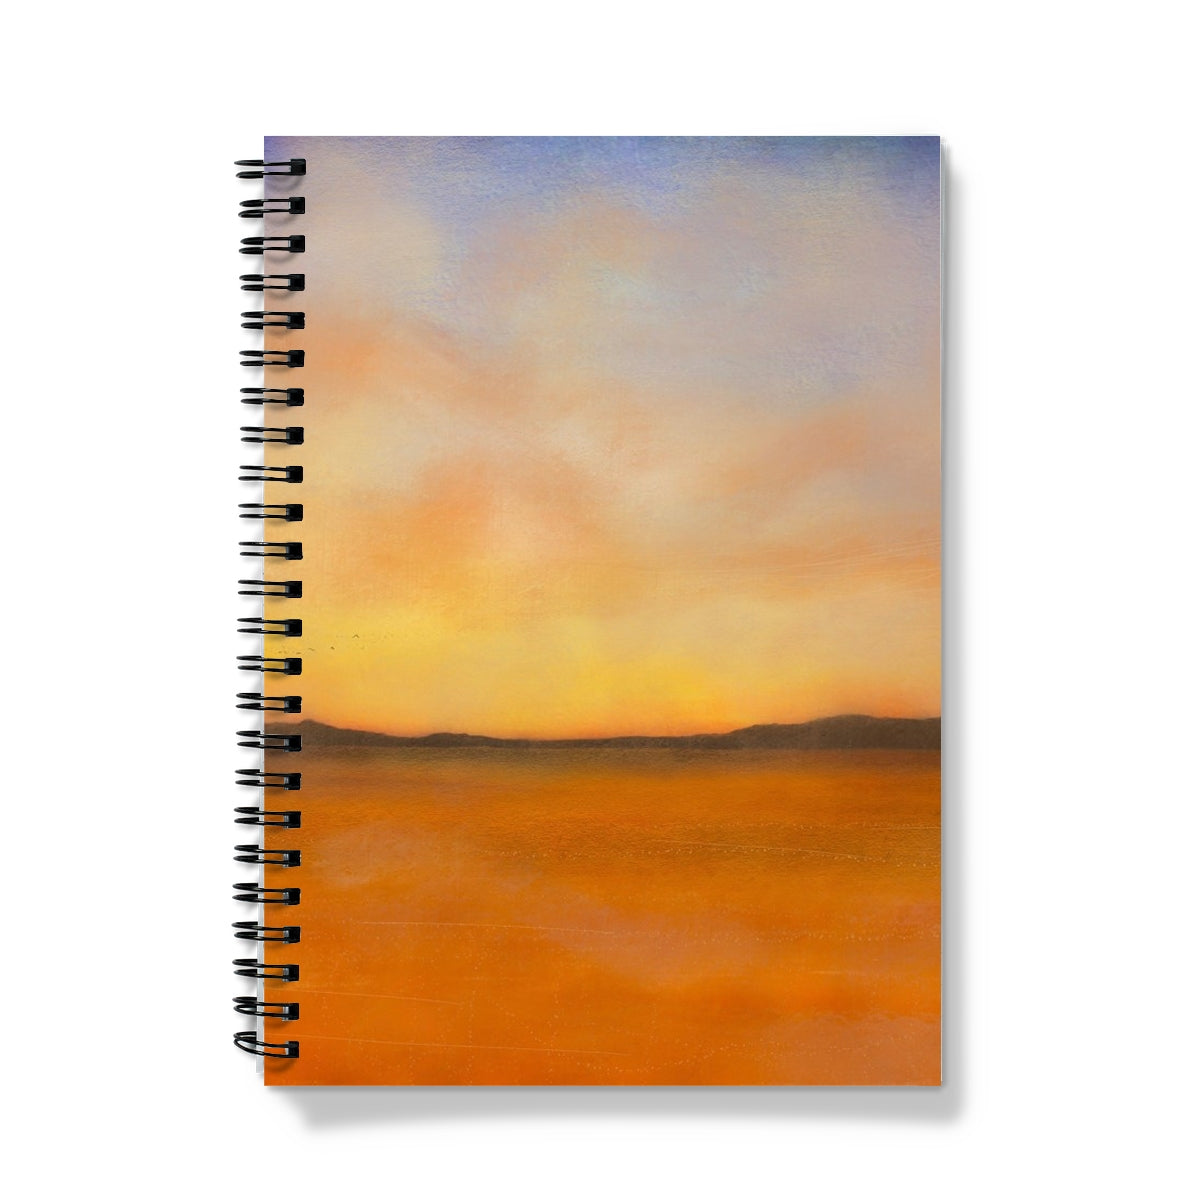 Islay Dawn Art Gifts Notebook-Journals & Notebooks-Hebridean Islands Art Gallery-A5-Lined-Paintings, Prints, Homeware, Art Gifts From Scotland By Scottish Artist Kevin Hunter